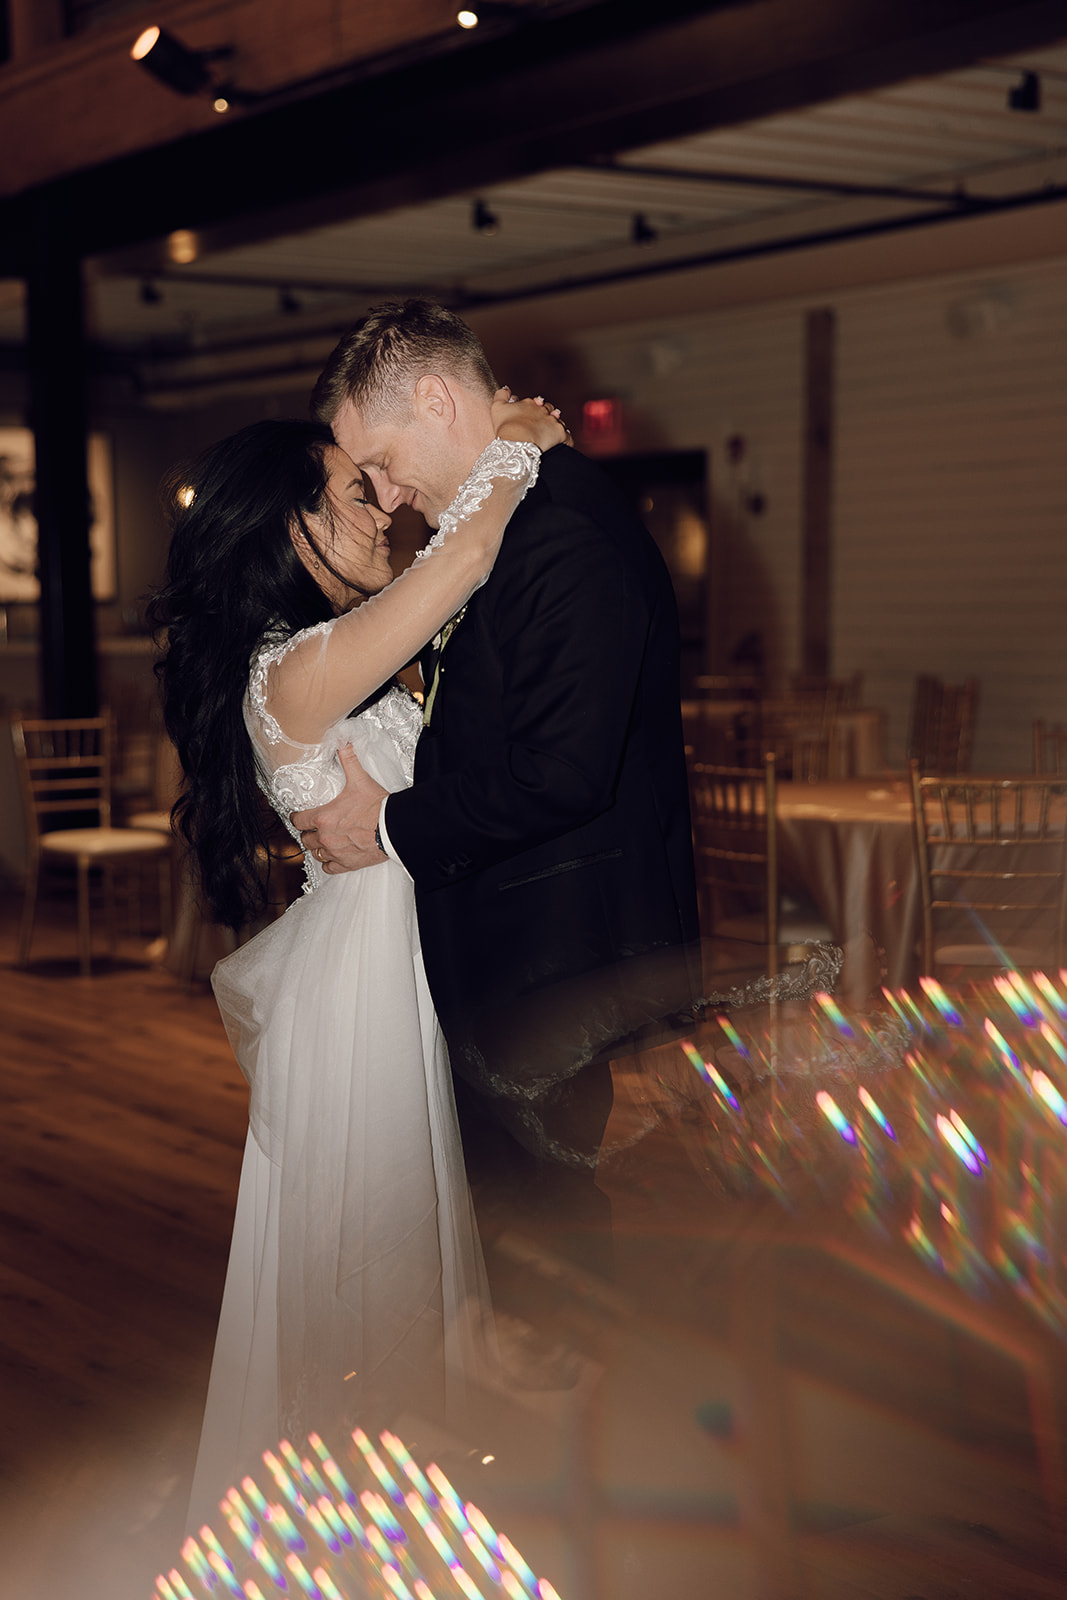 the couple dancing with their arms around each other captured by the destination wedding photographer